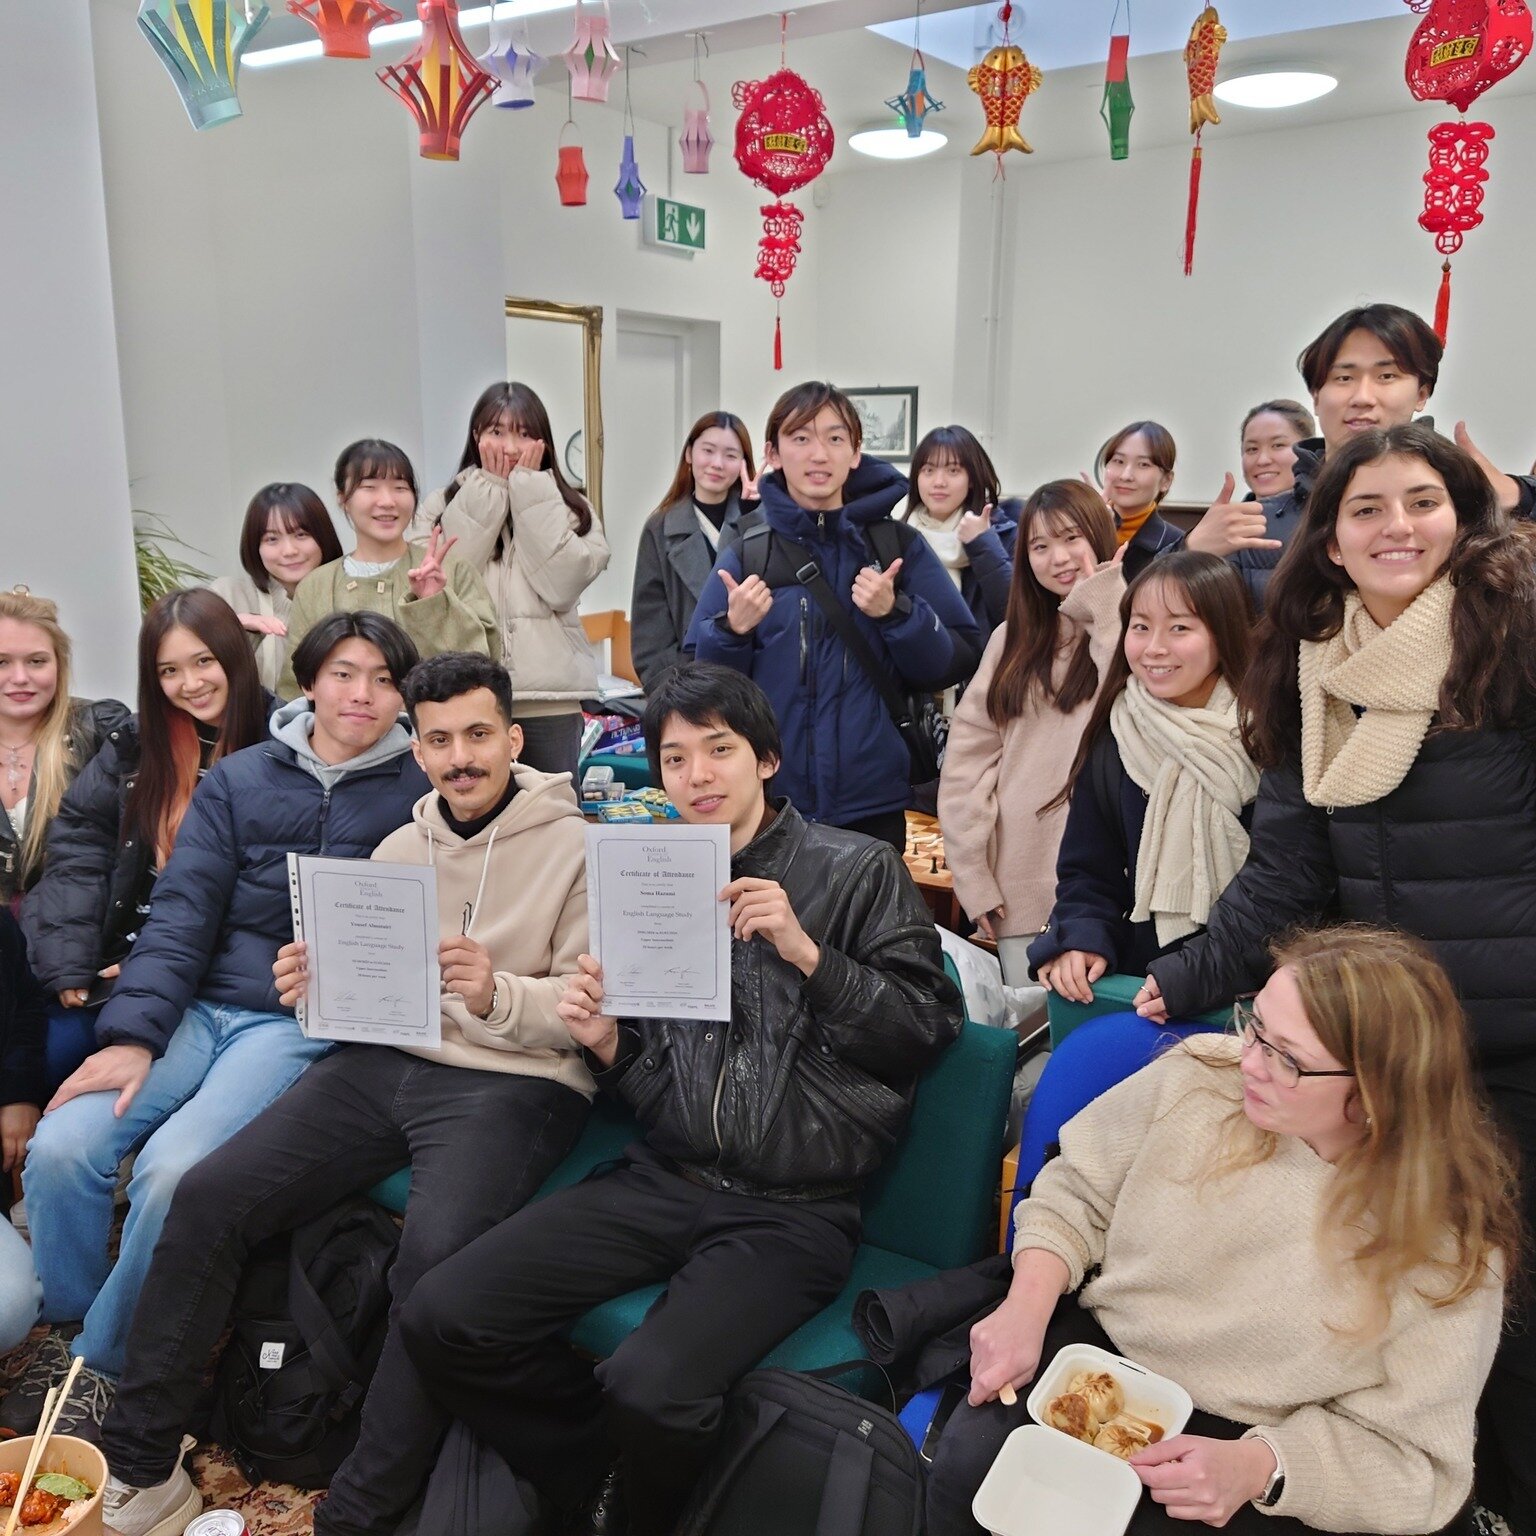 Happy Friday!🤩
Some of our leavers for this week! Best of luck to all😇

 #EFL #internationalstudent #unitedkingdom #internationallanguage #studyabroadyenglish #community #cityofoxford #friends #studyintheuk #studywithus #englishlanguage #internatio